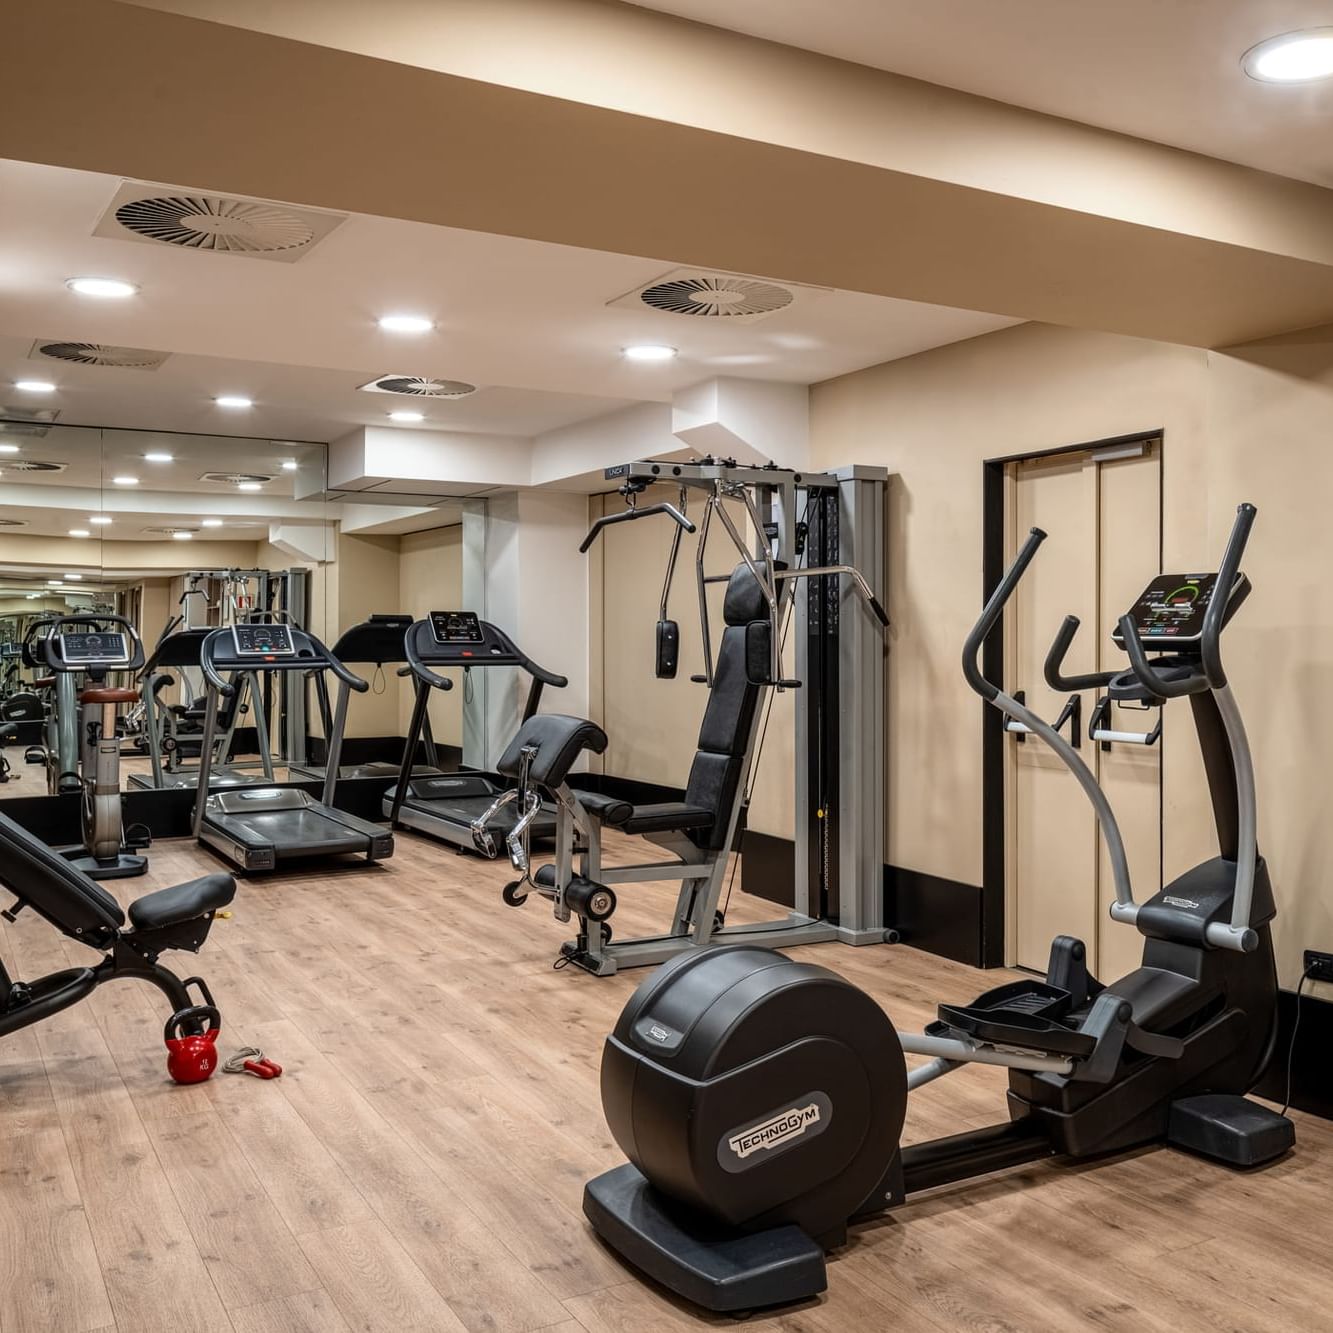 UNAHOTELS Galles Milano - Area Fitness